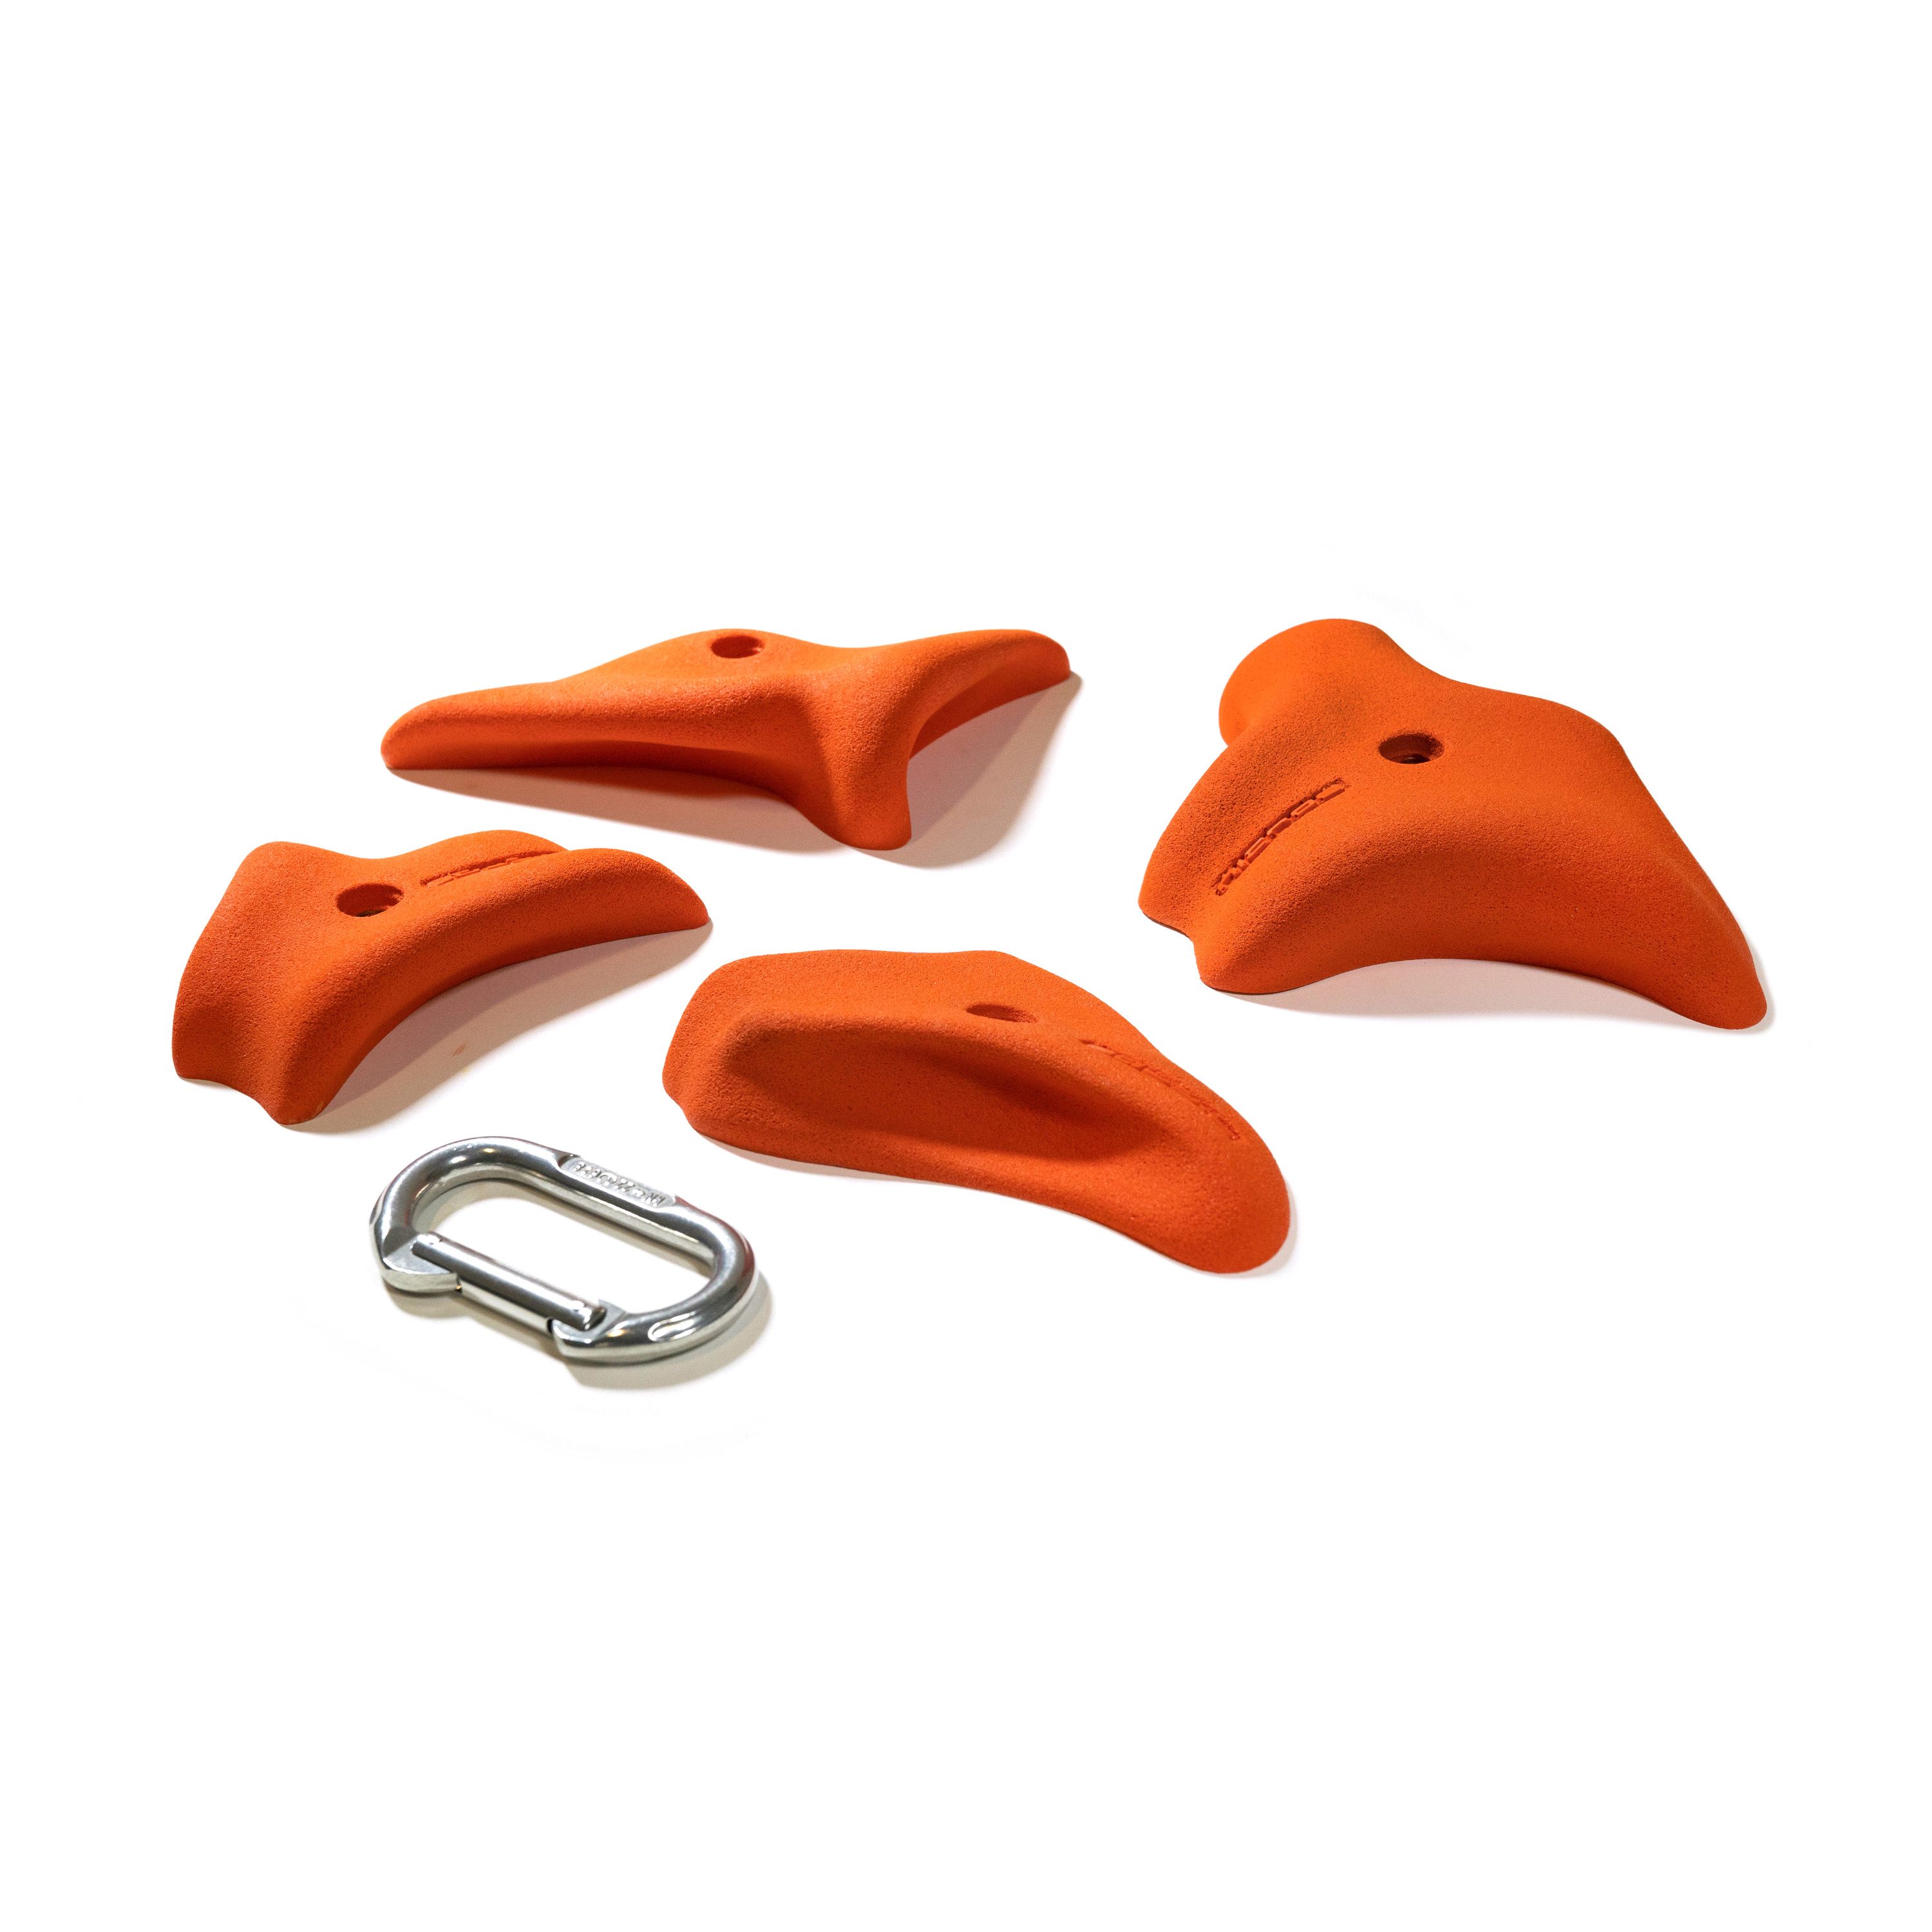 Hbb Jugs Learning To Fly Handholds - Orange